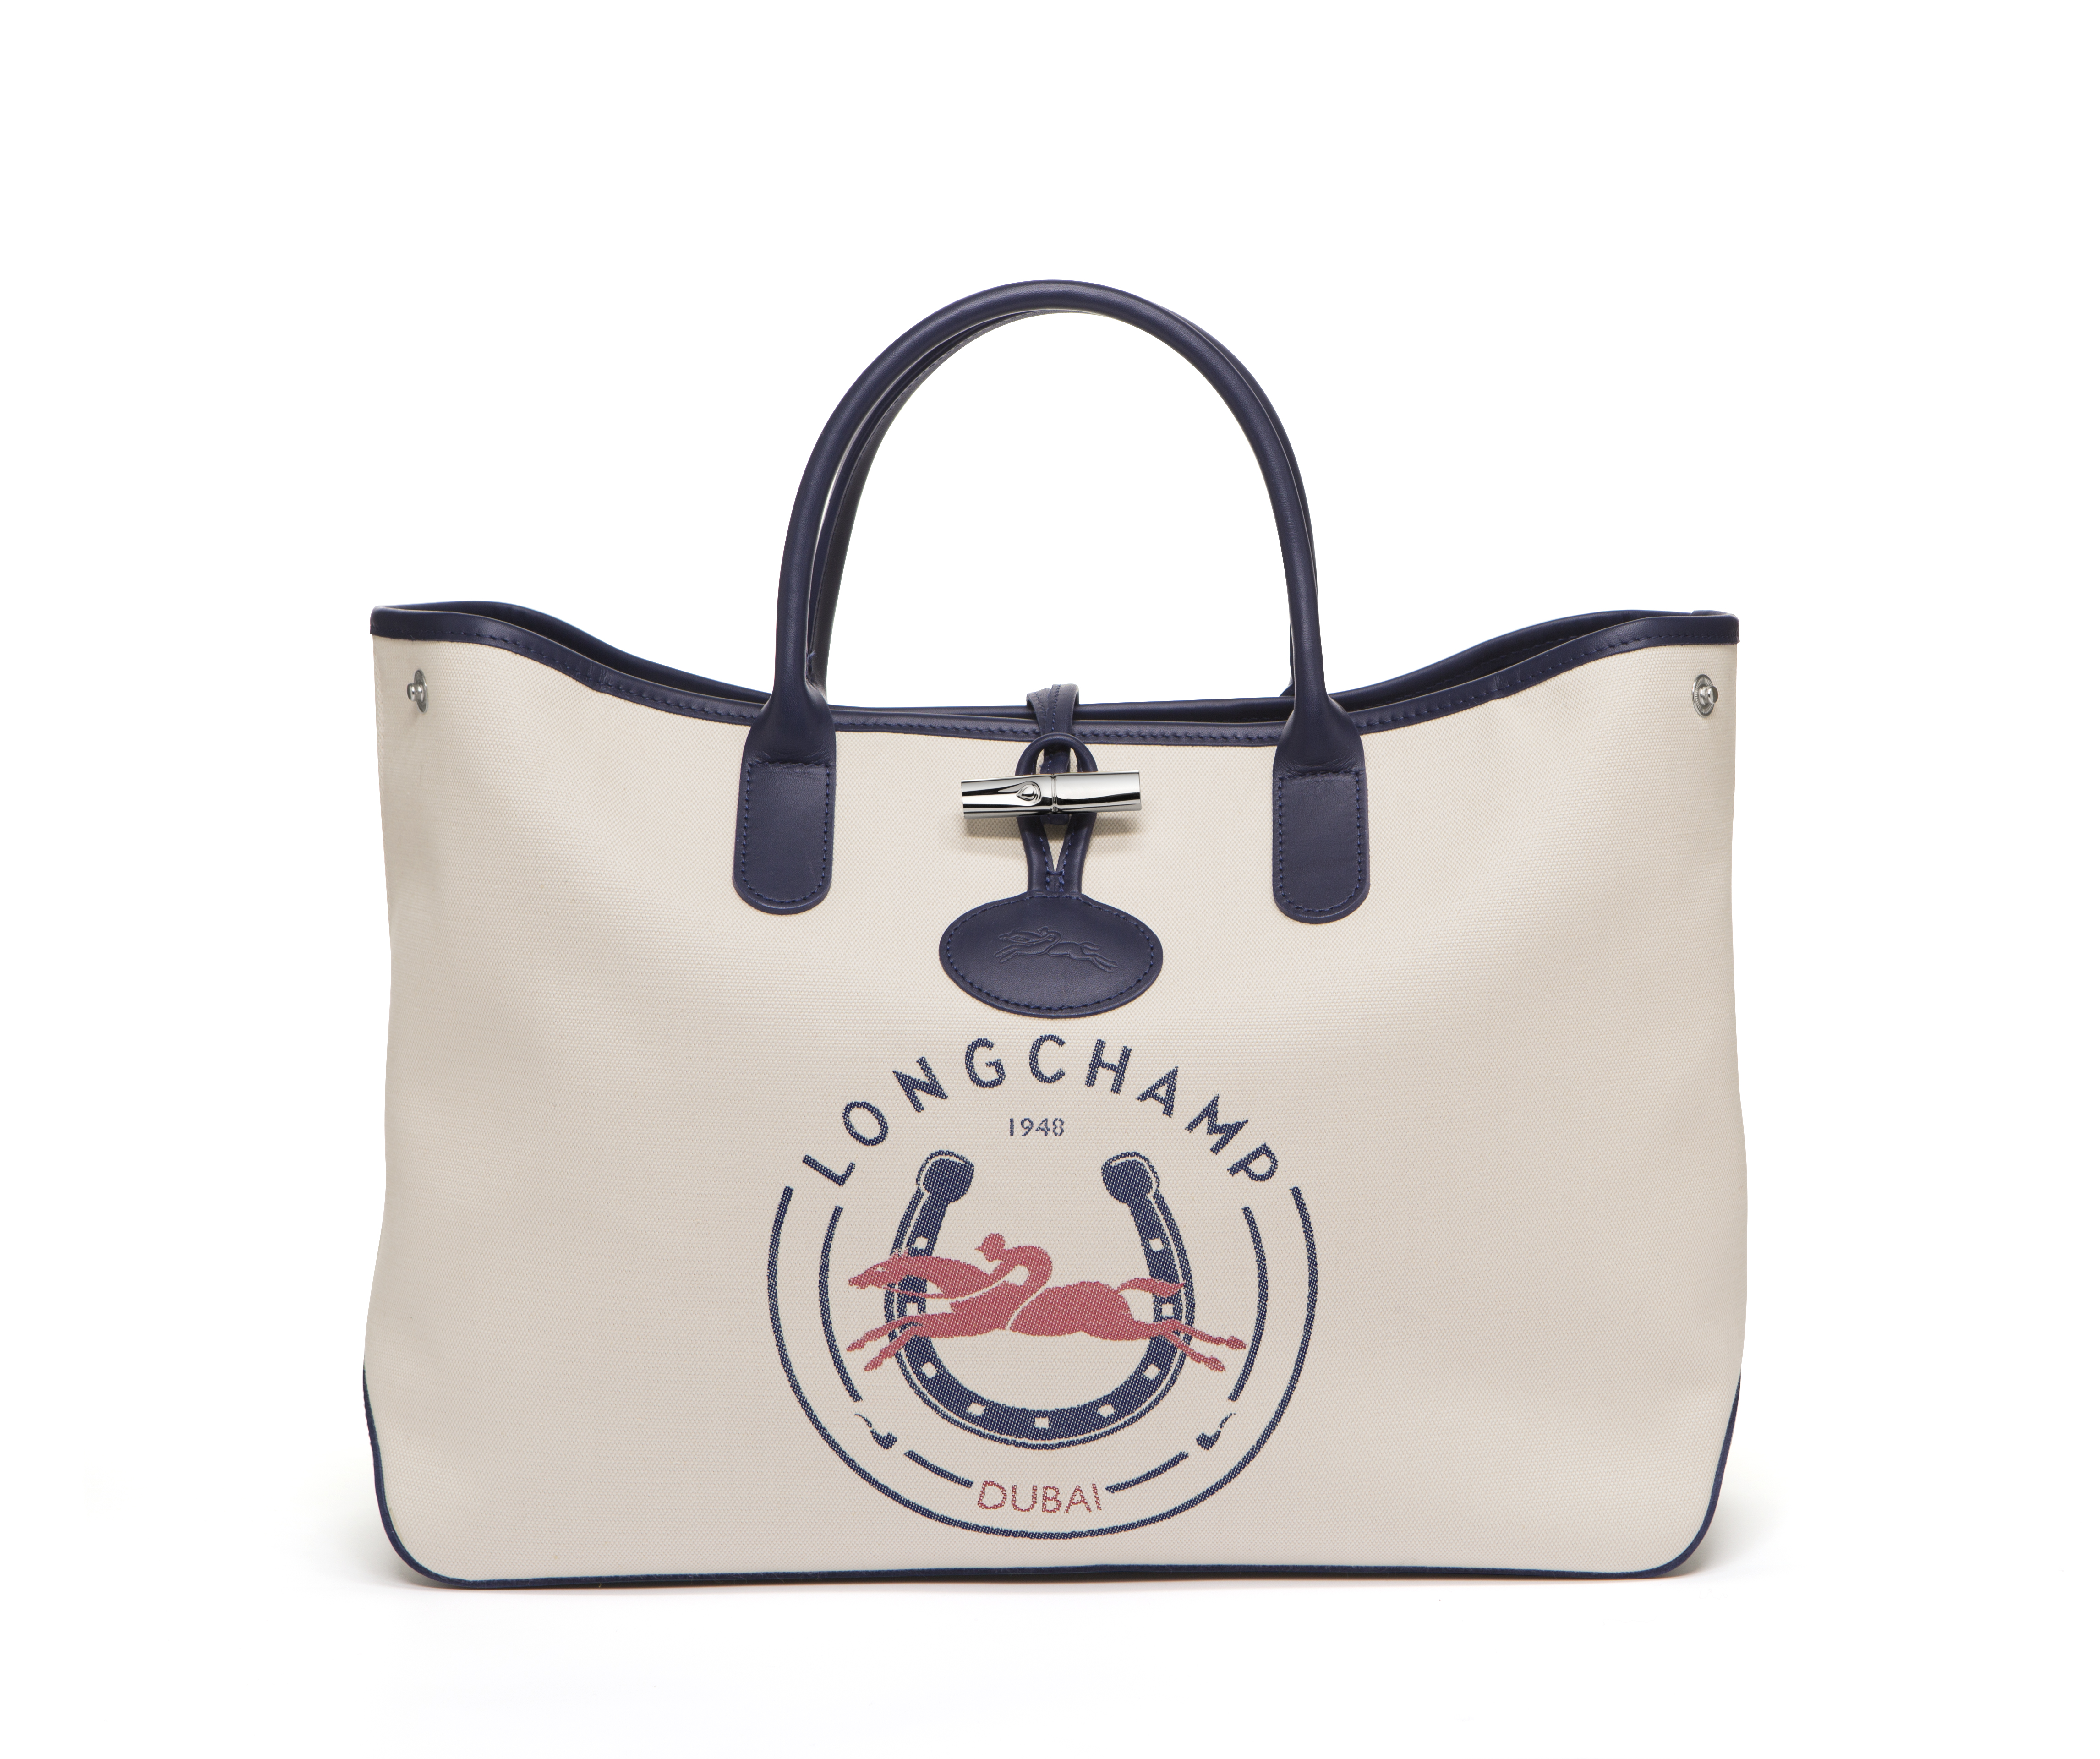 The new Limited Edition Longchamp piece 